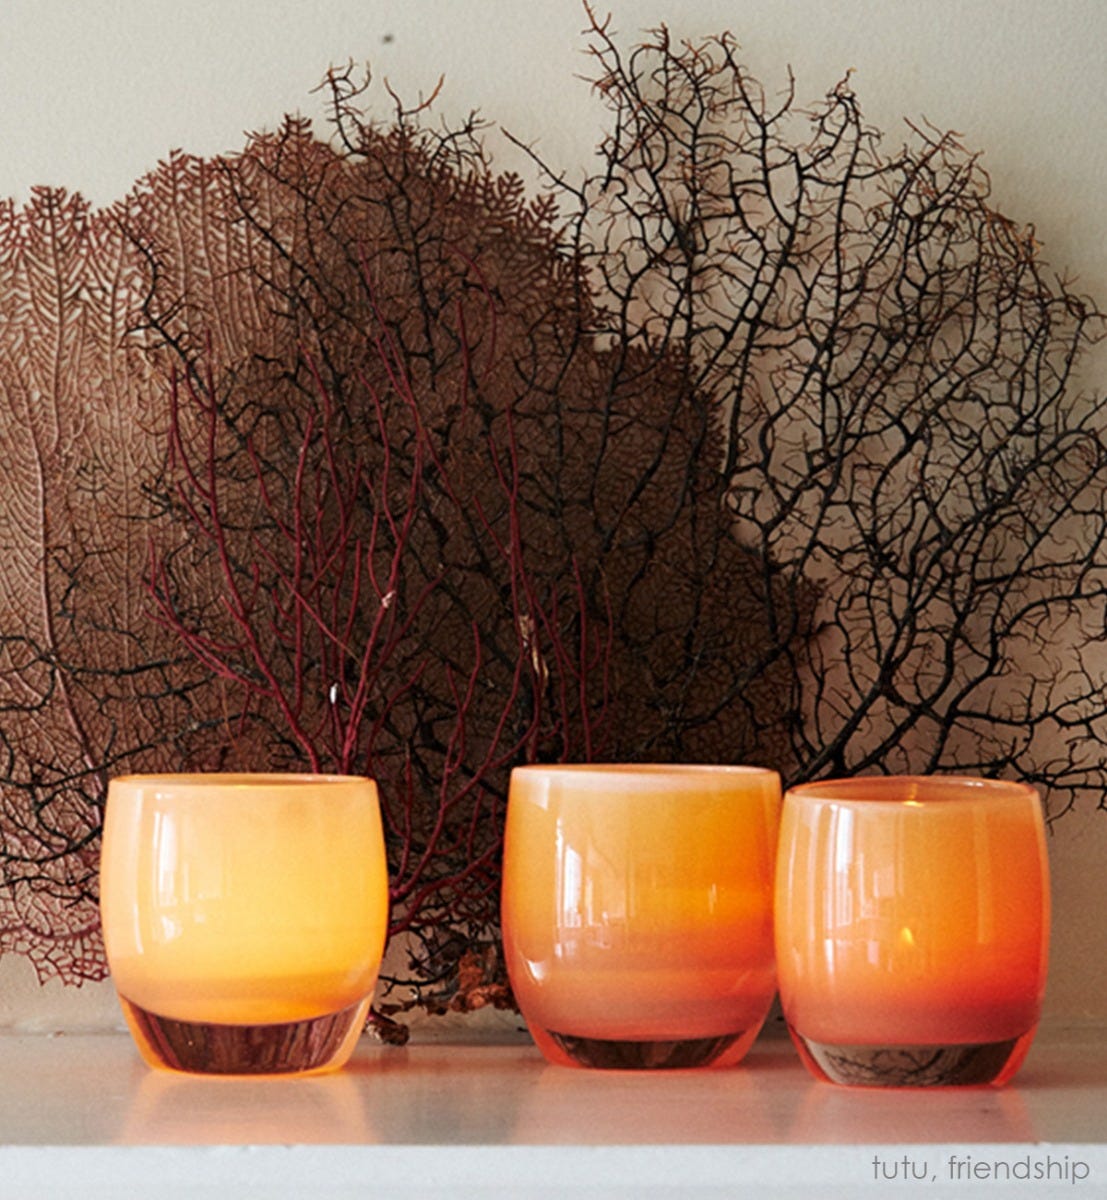 tutu, tan hand-blown glass votive candle holder. Paired with friendship